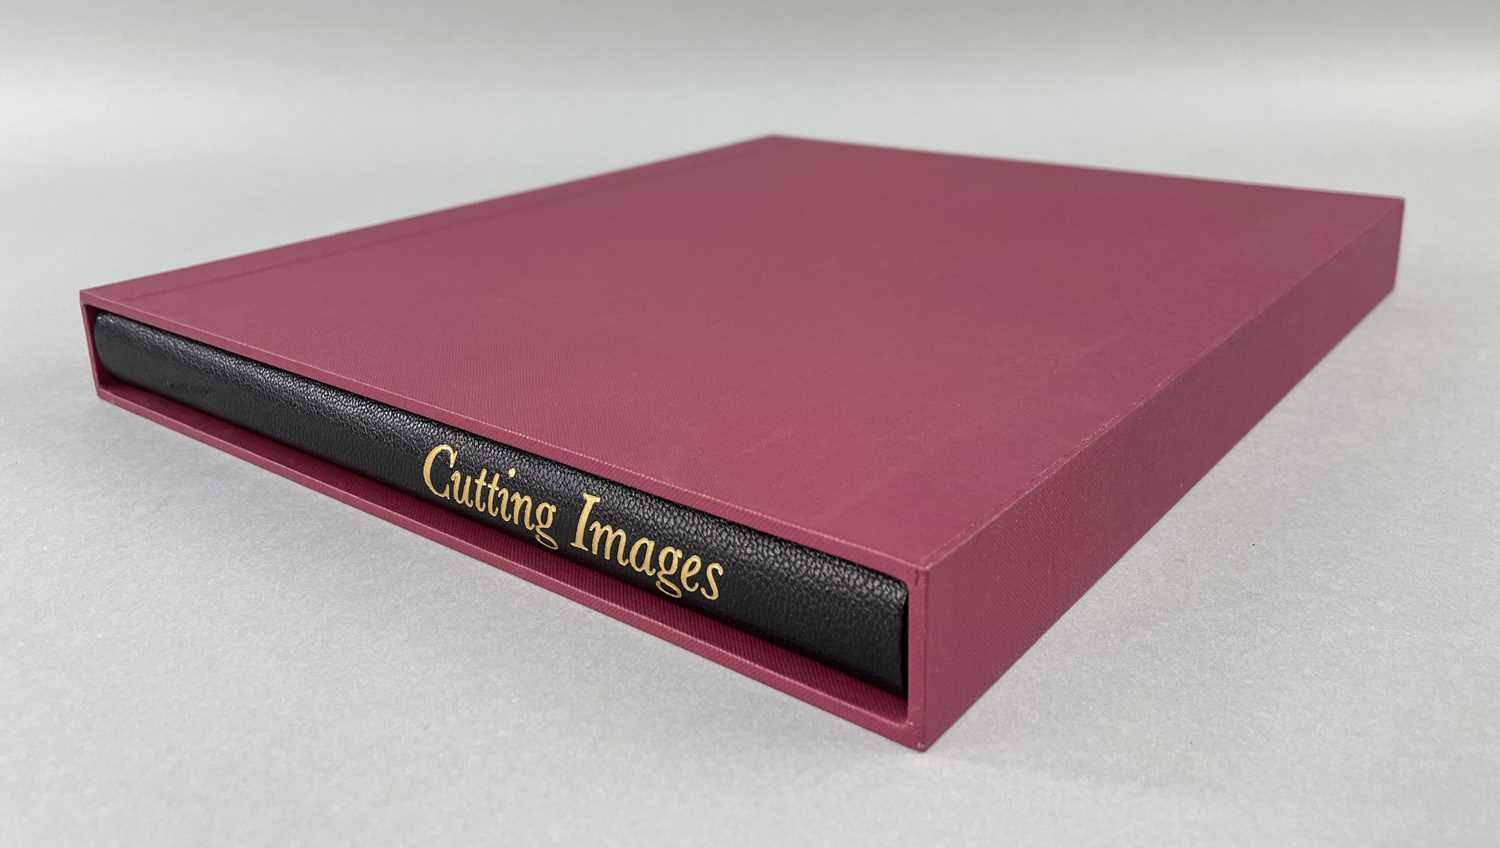 ‡ SIR KYFFIN WILLIAMS RA limited edition (172/275) volume of 'Cutting Images' - printed on T H - Image 7 of 7